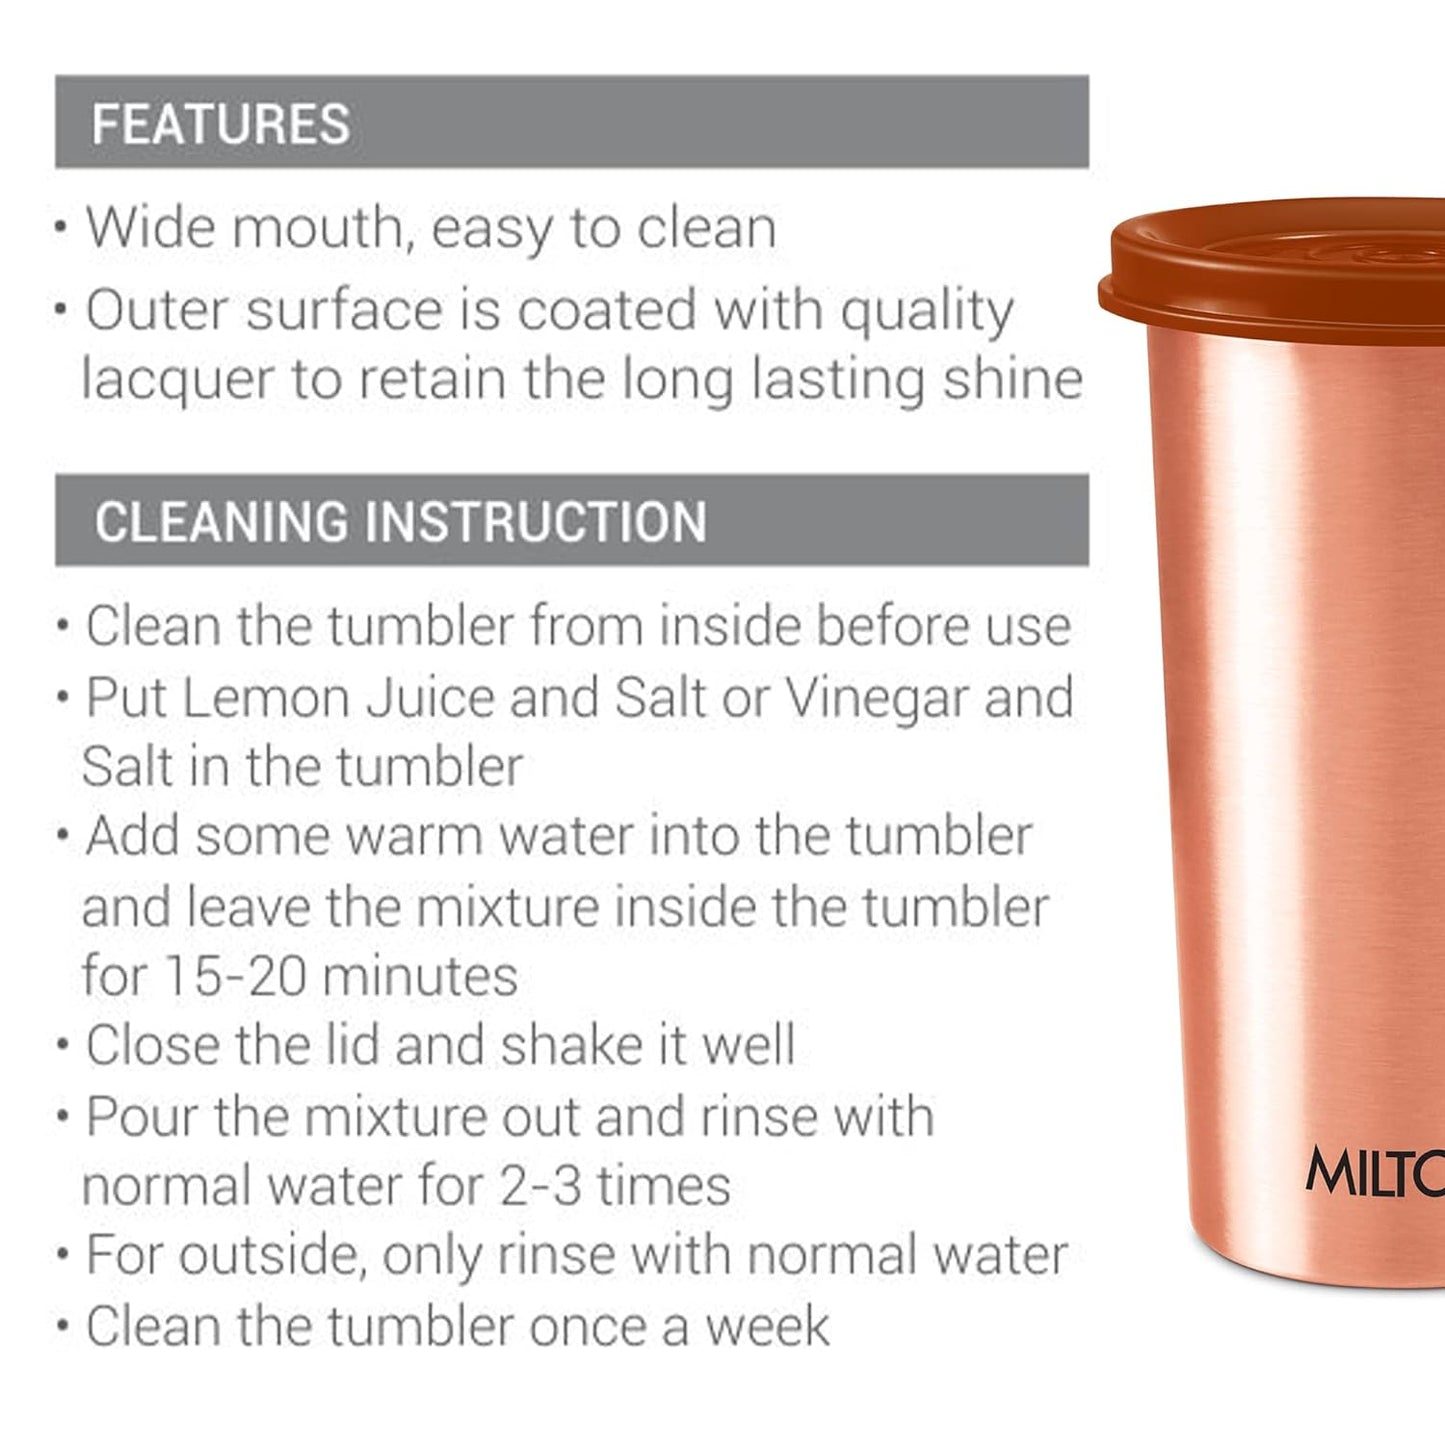 MILTON Copper Drinking Water Tumbler with Lid - 480 ml Capacity